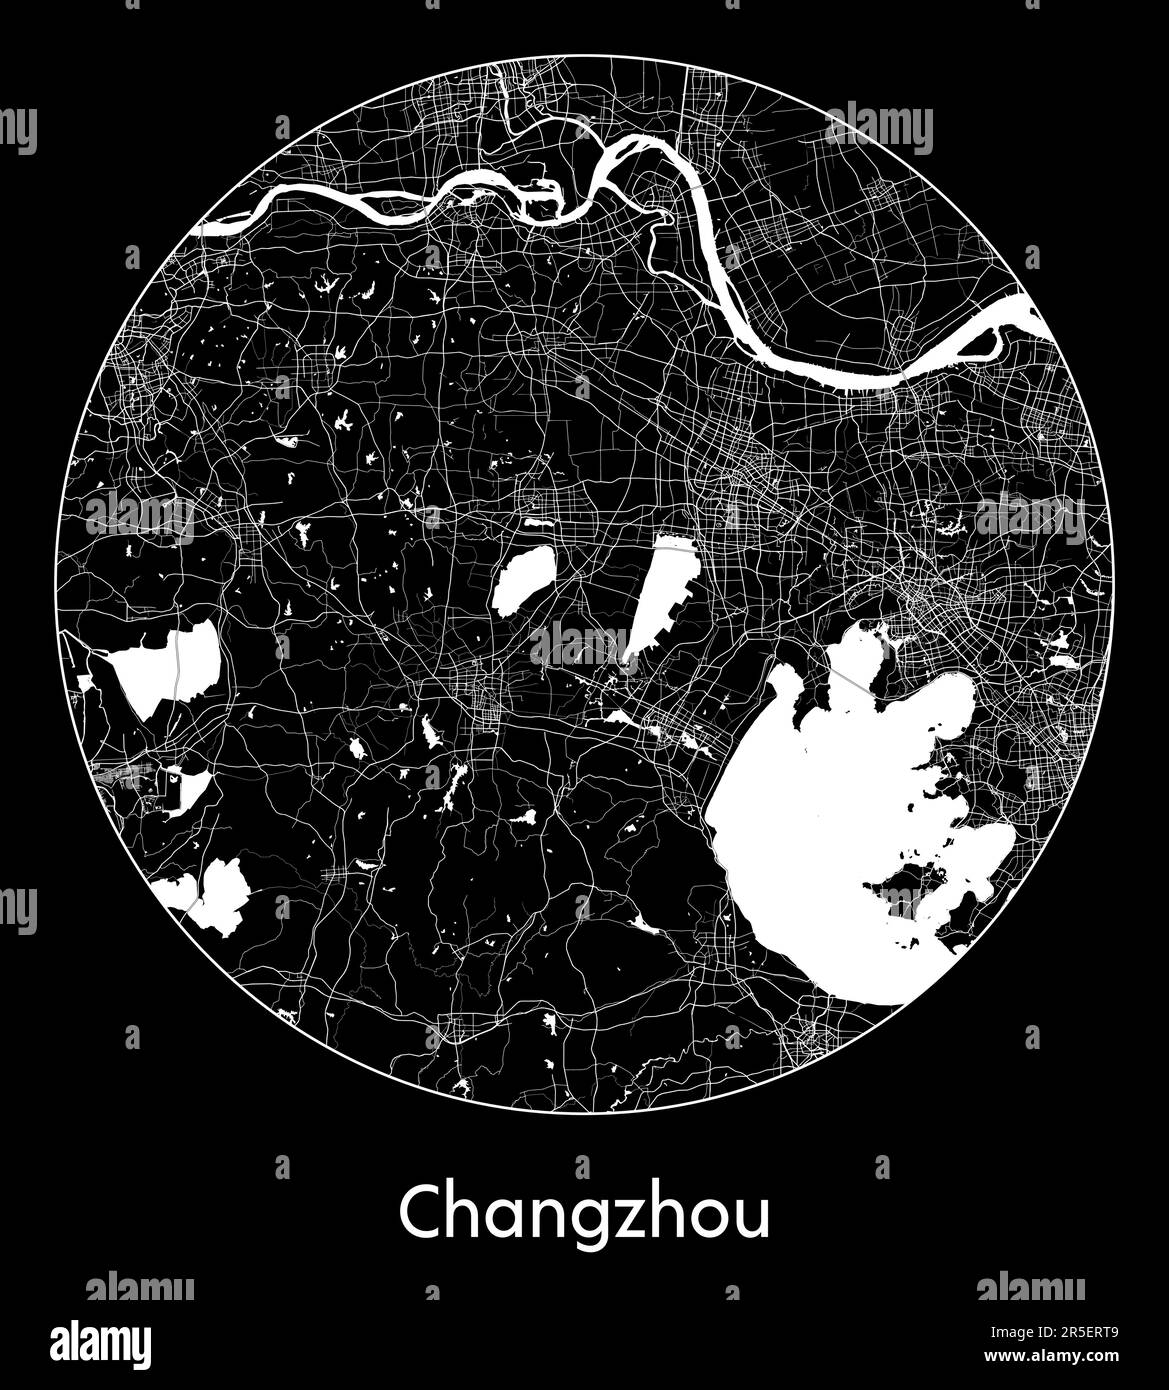 City Map Changzhou China Asia vector illustration Stock Vector